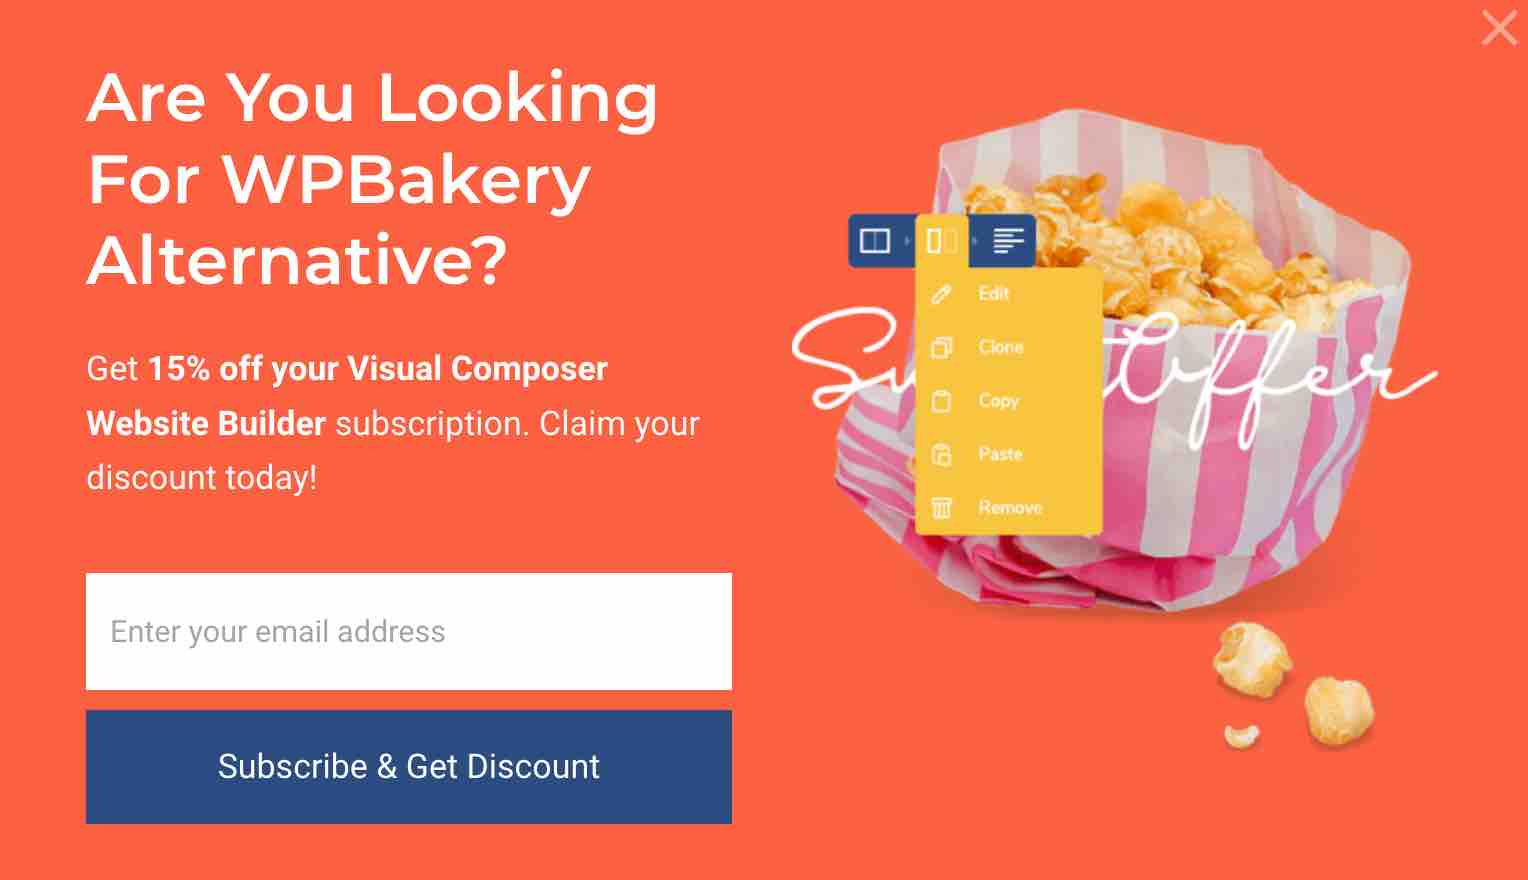 WPBakery alternative popup to promote Visual Composer.